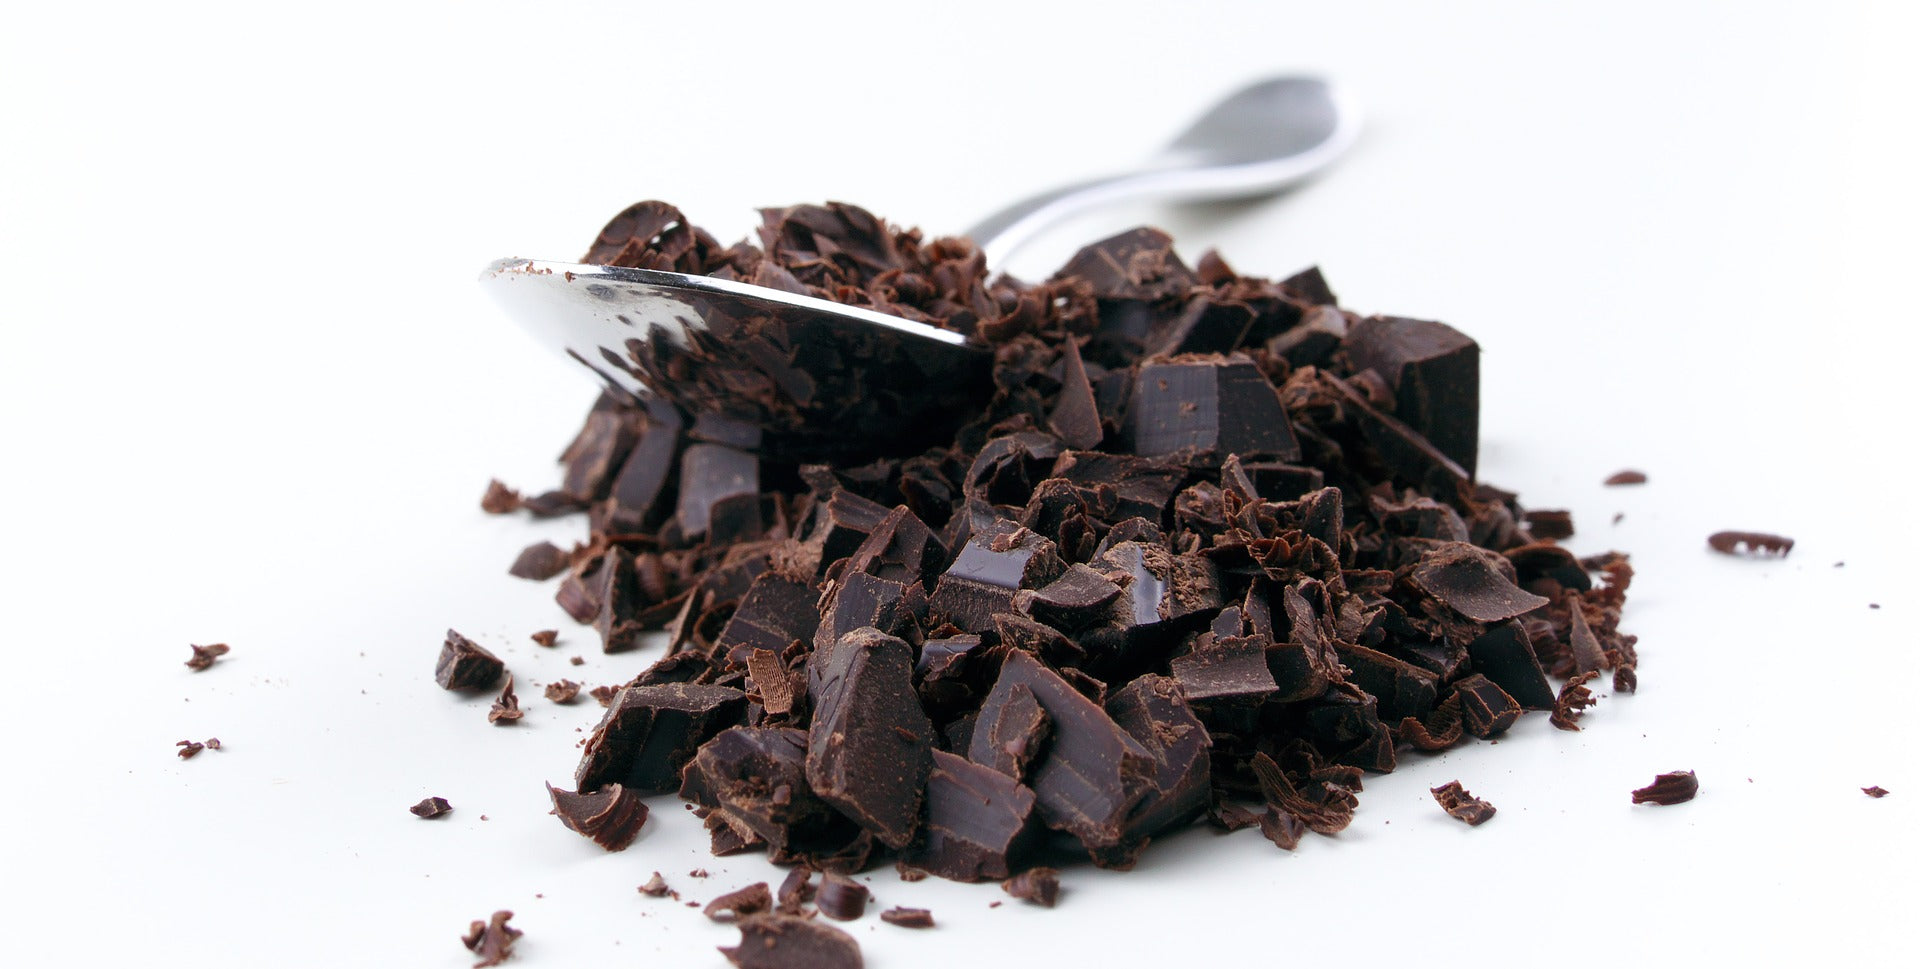 How Do You Know You’ve Got Real Dark Chocolate?